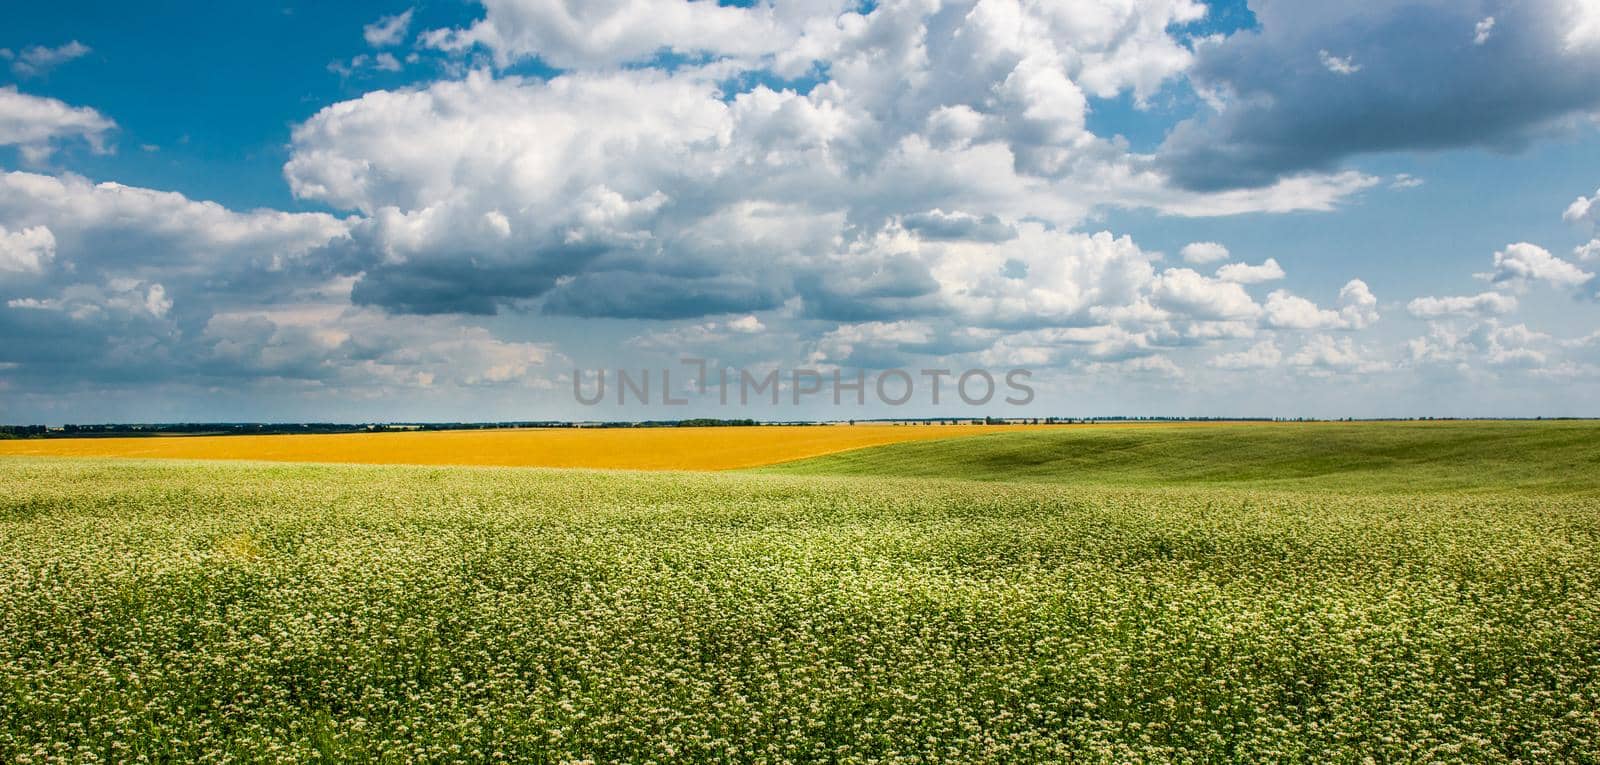 Yellow-green field under the clouds by tan4ikk1